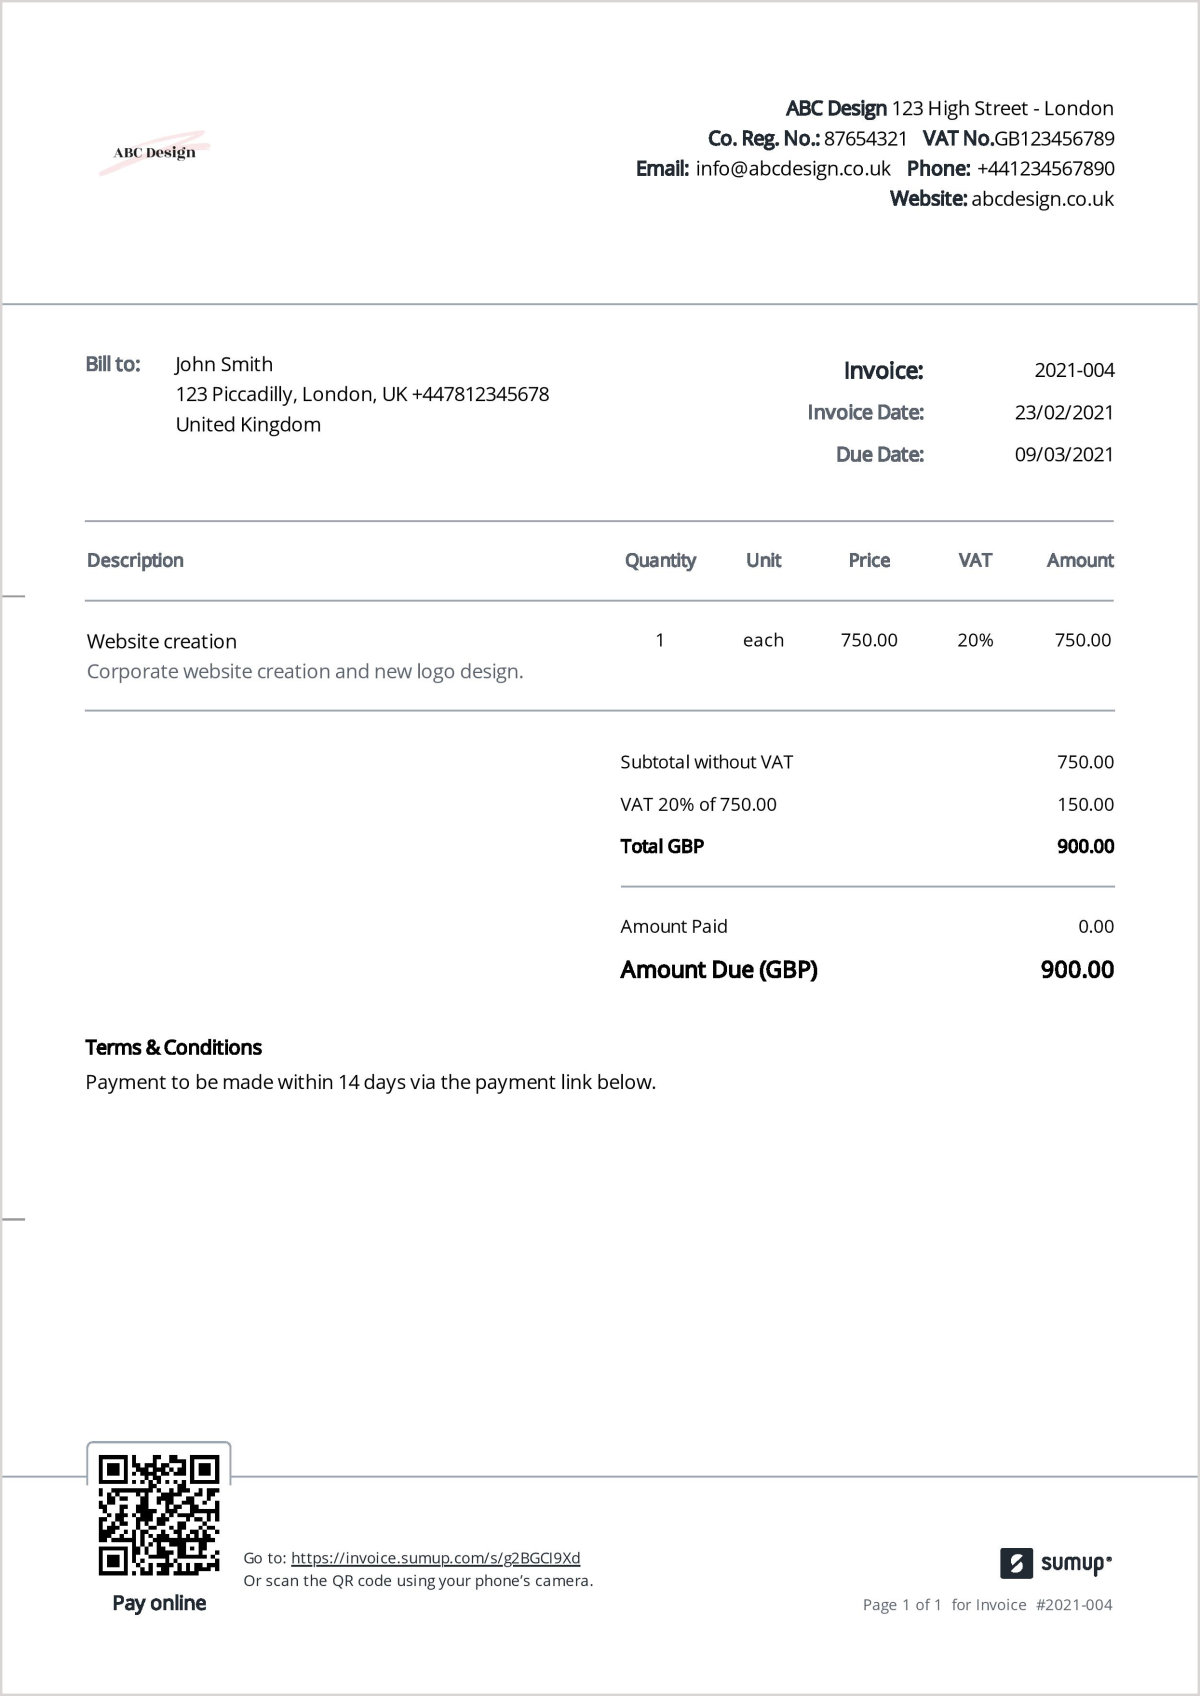 Example of a VAT invoice created using SumUp Invoices